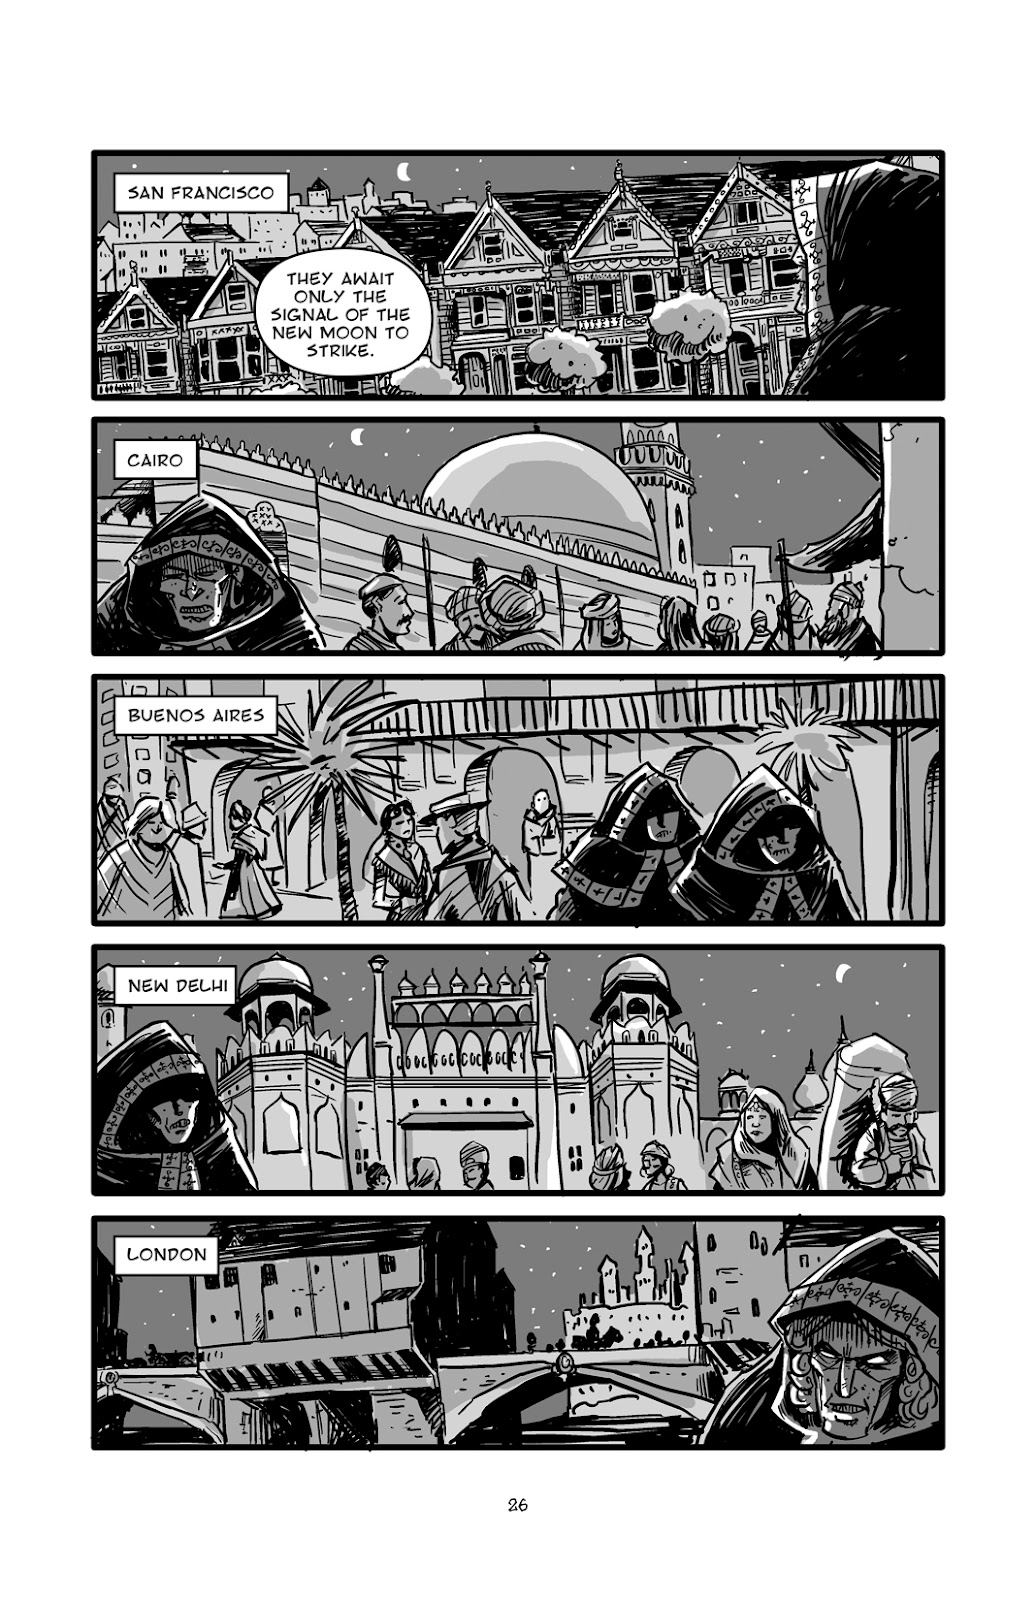 Pinocchio: Vampire Slayer - Of Wood and Blood issue 1 - Page 27